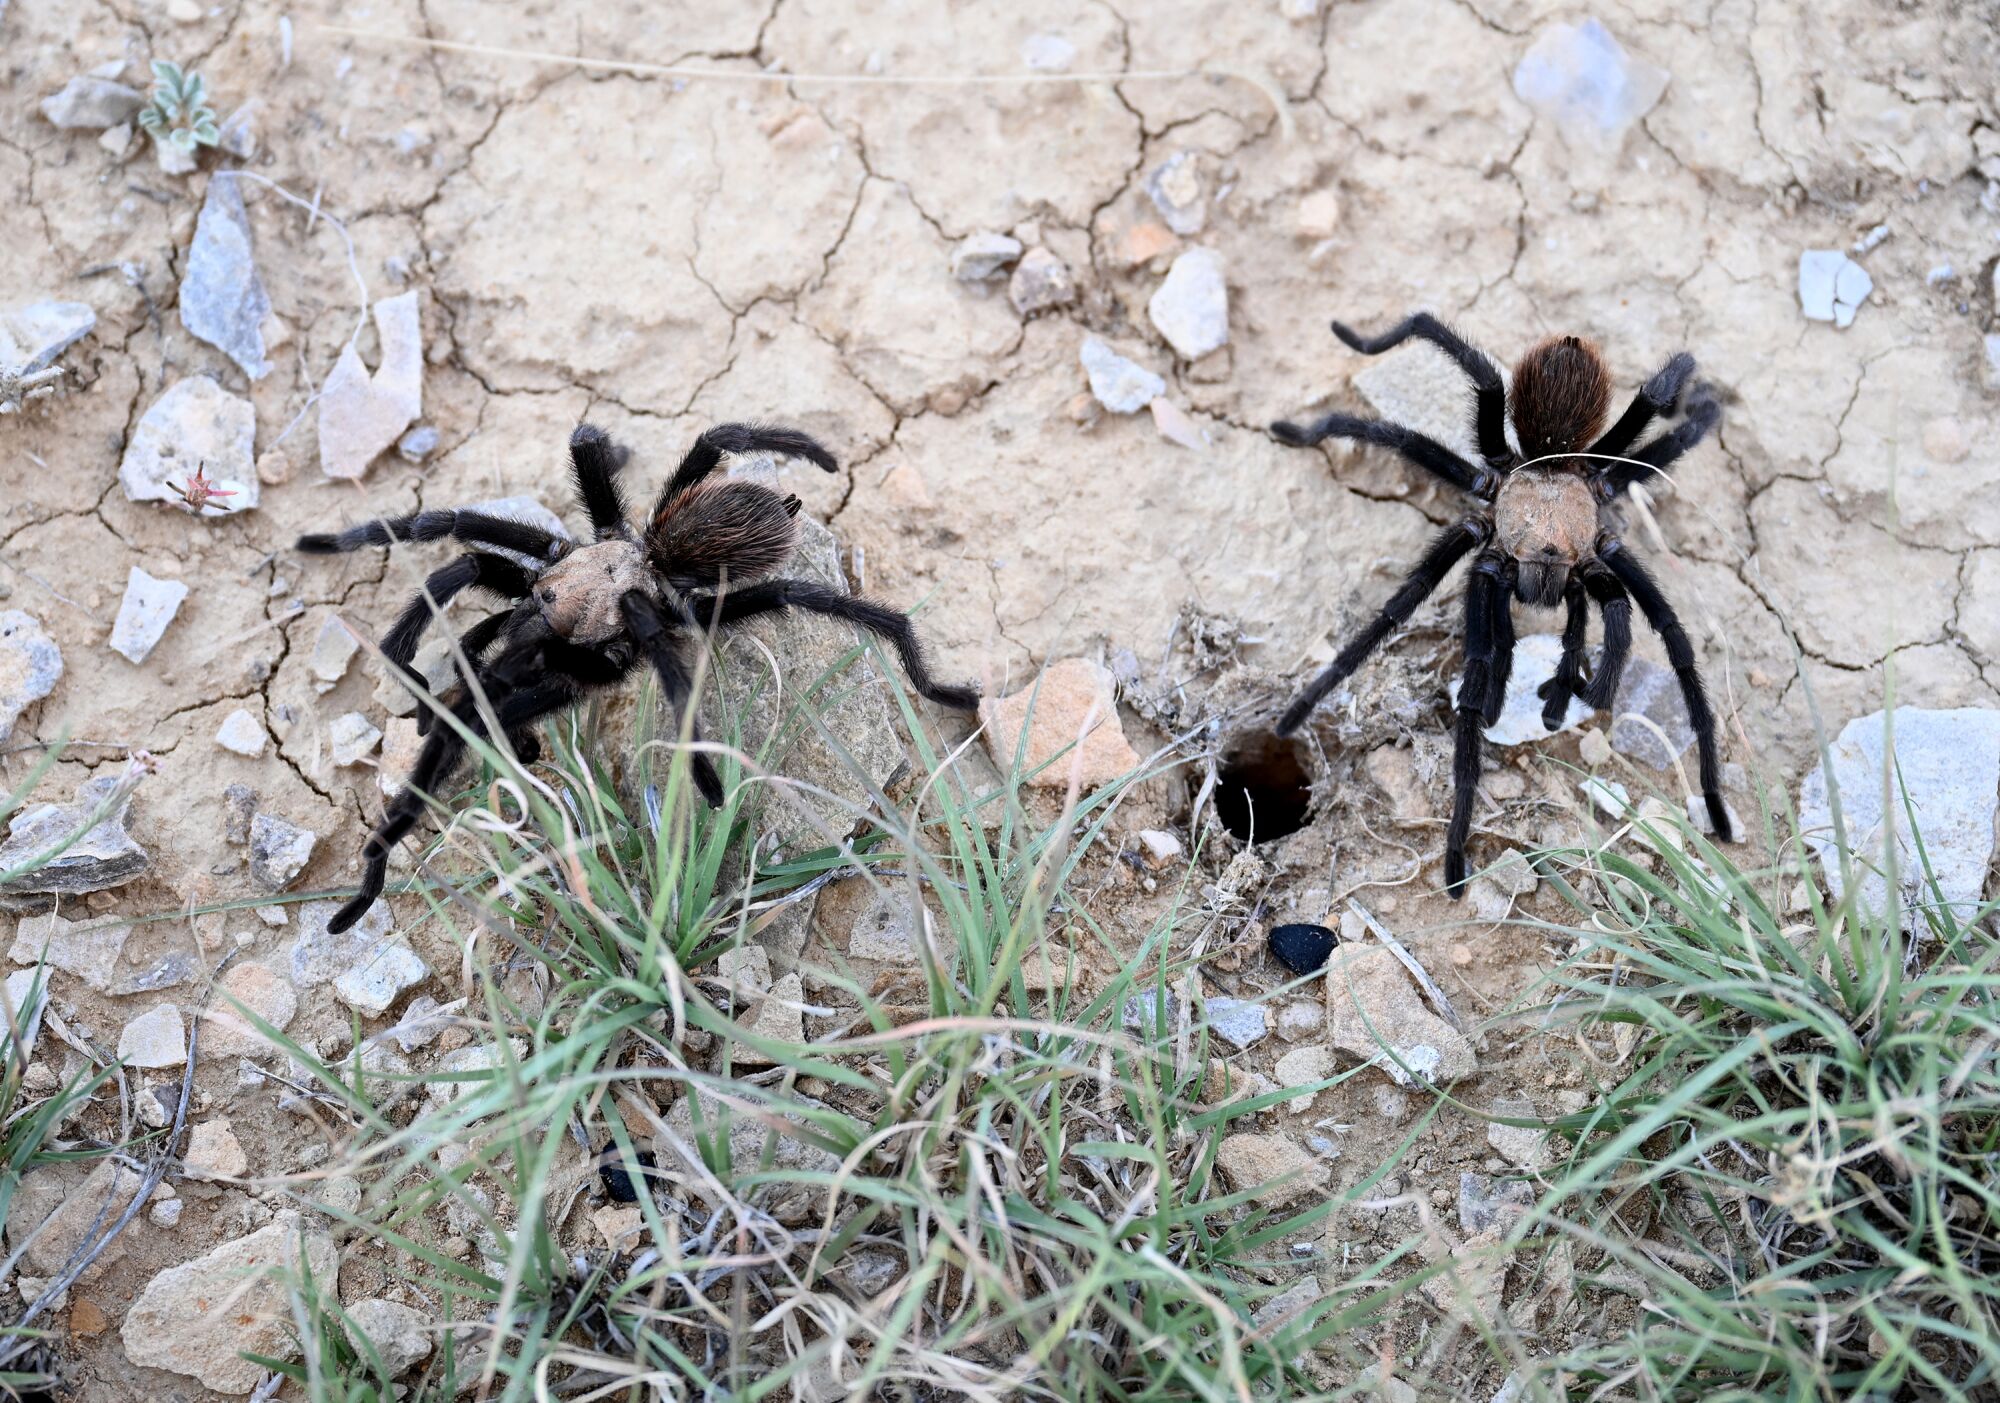 Two tarantulas on dirt near holes in the ground